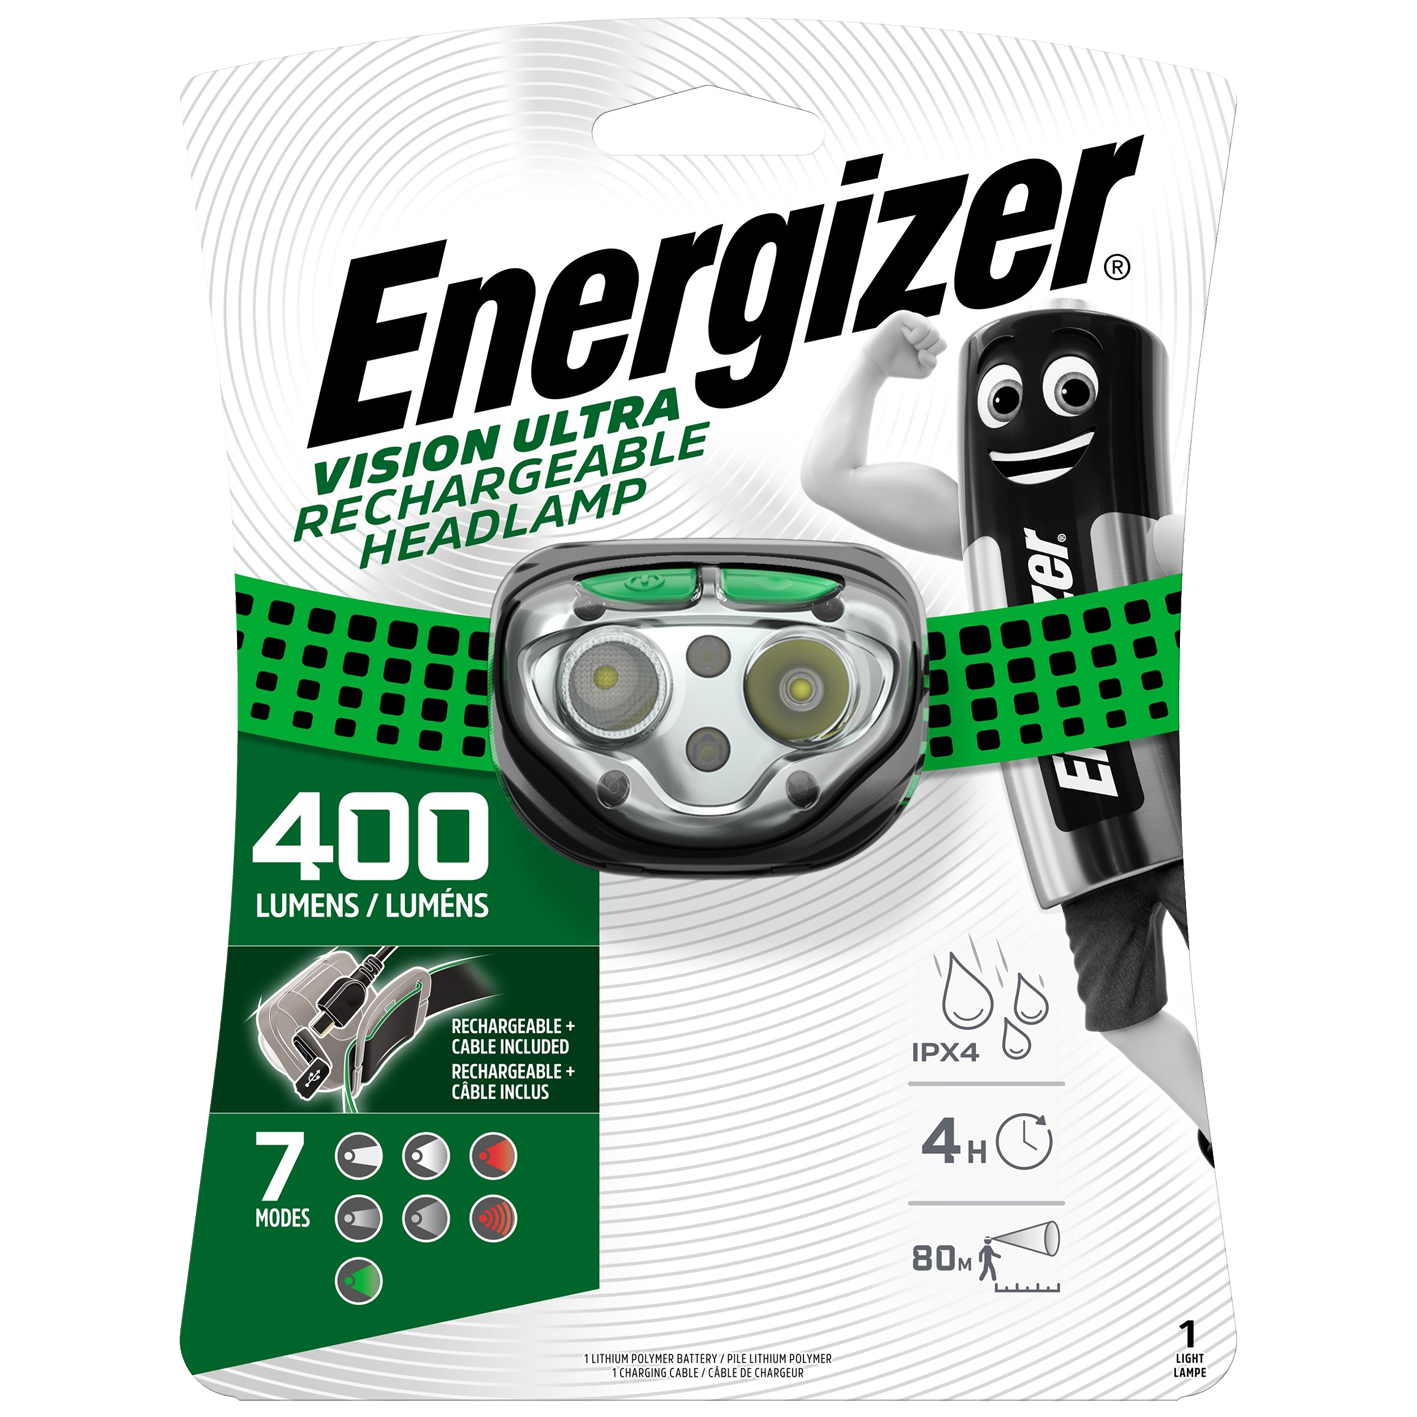 Energizer LED Vision Ultra Rechargeable Headlamp - 400 Lumens